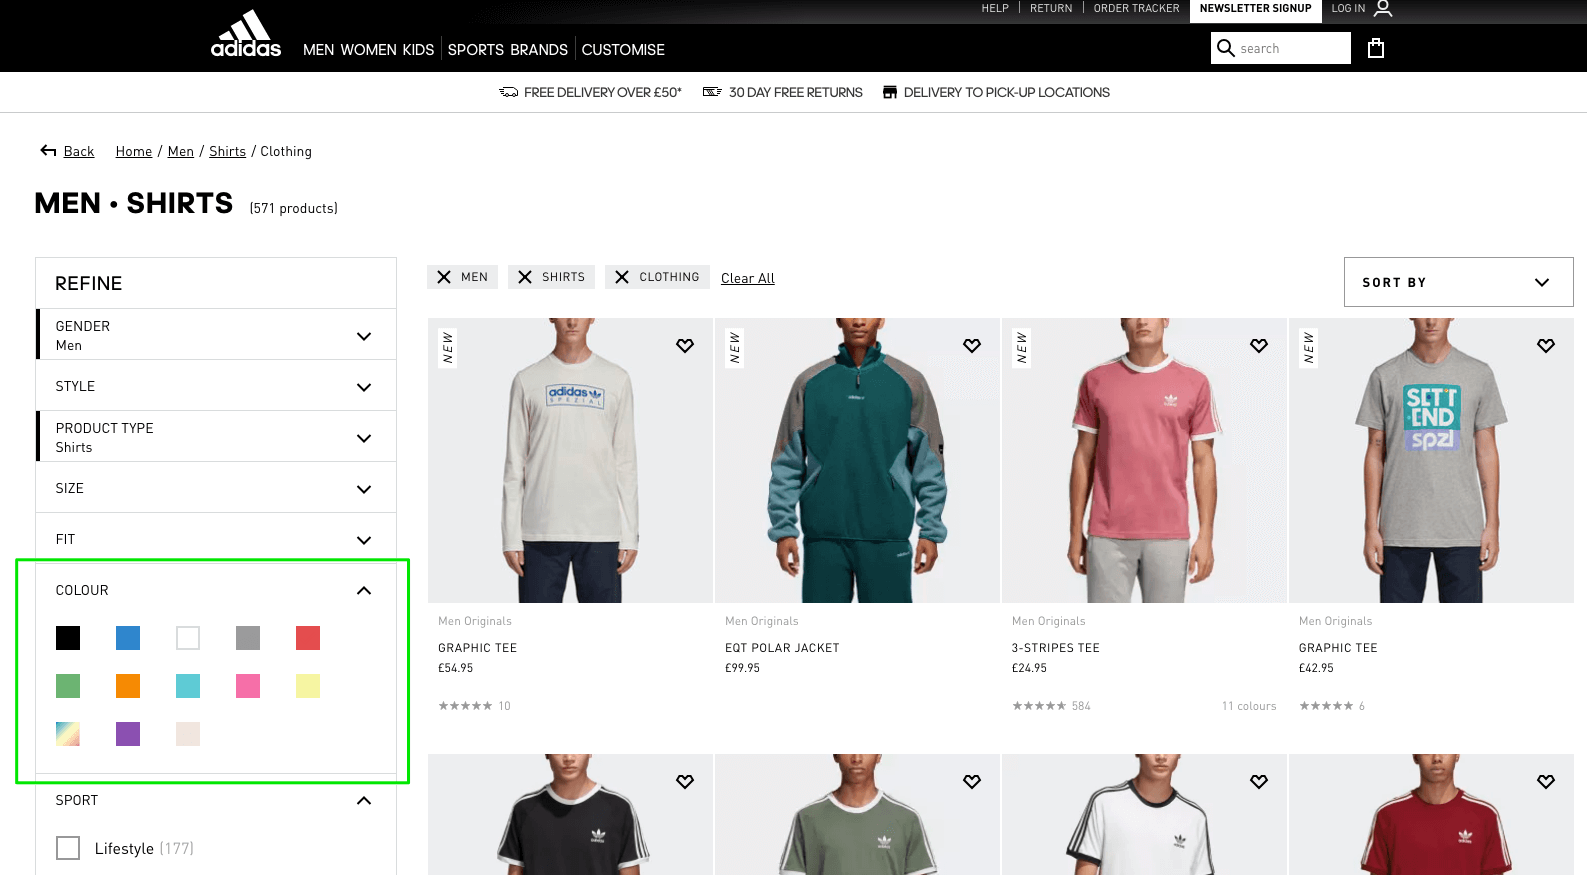 Available colors of clothes shown on Adidas online store product listing